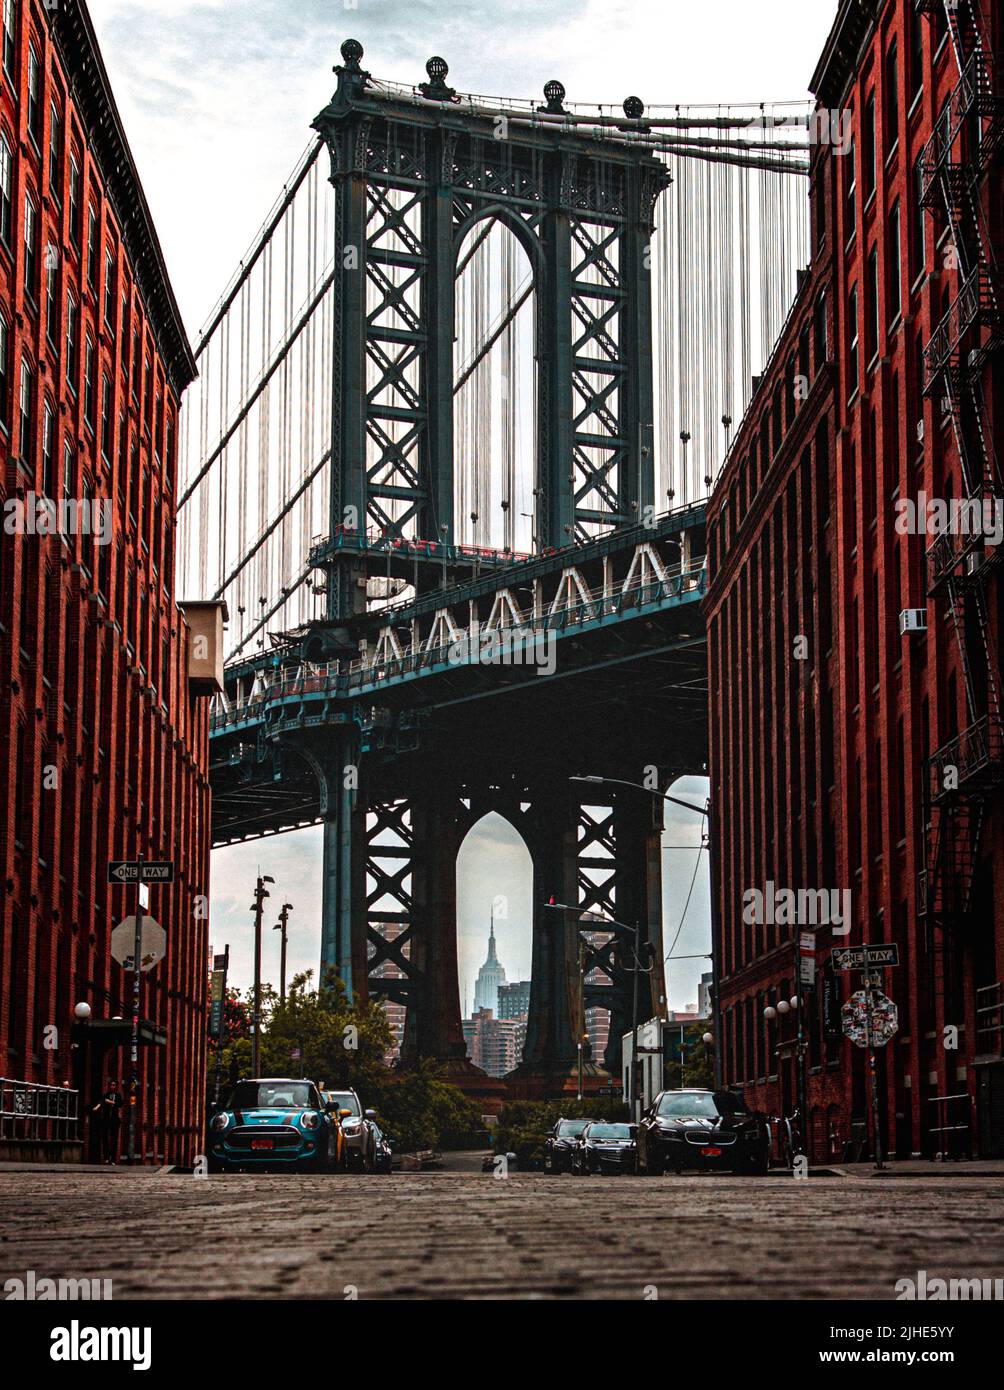 Iconic Dumbo Manhatten photograph. Between the pillers of the manhetten bridge is the Empire state building visible. Stock Photo